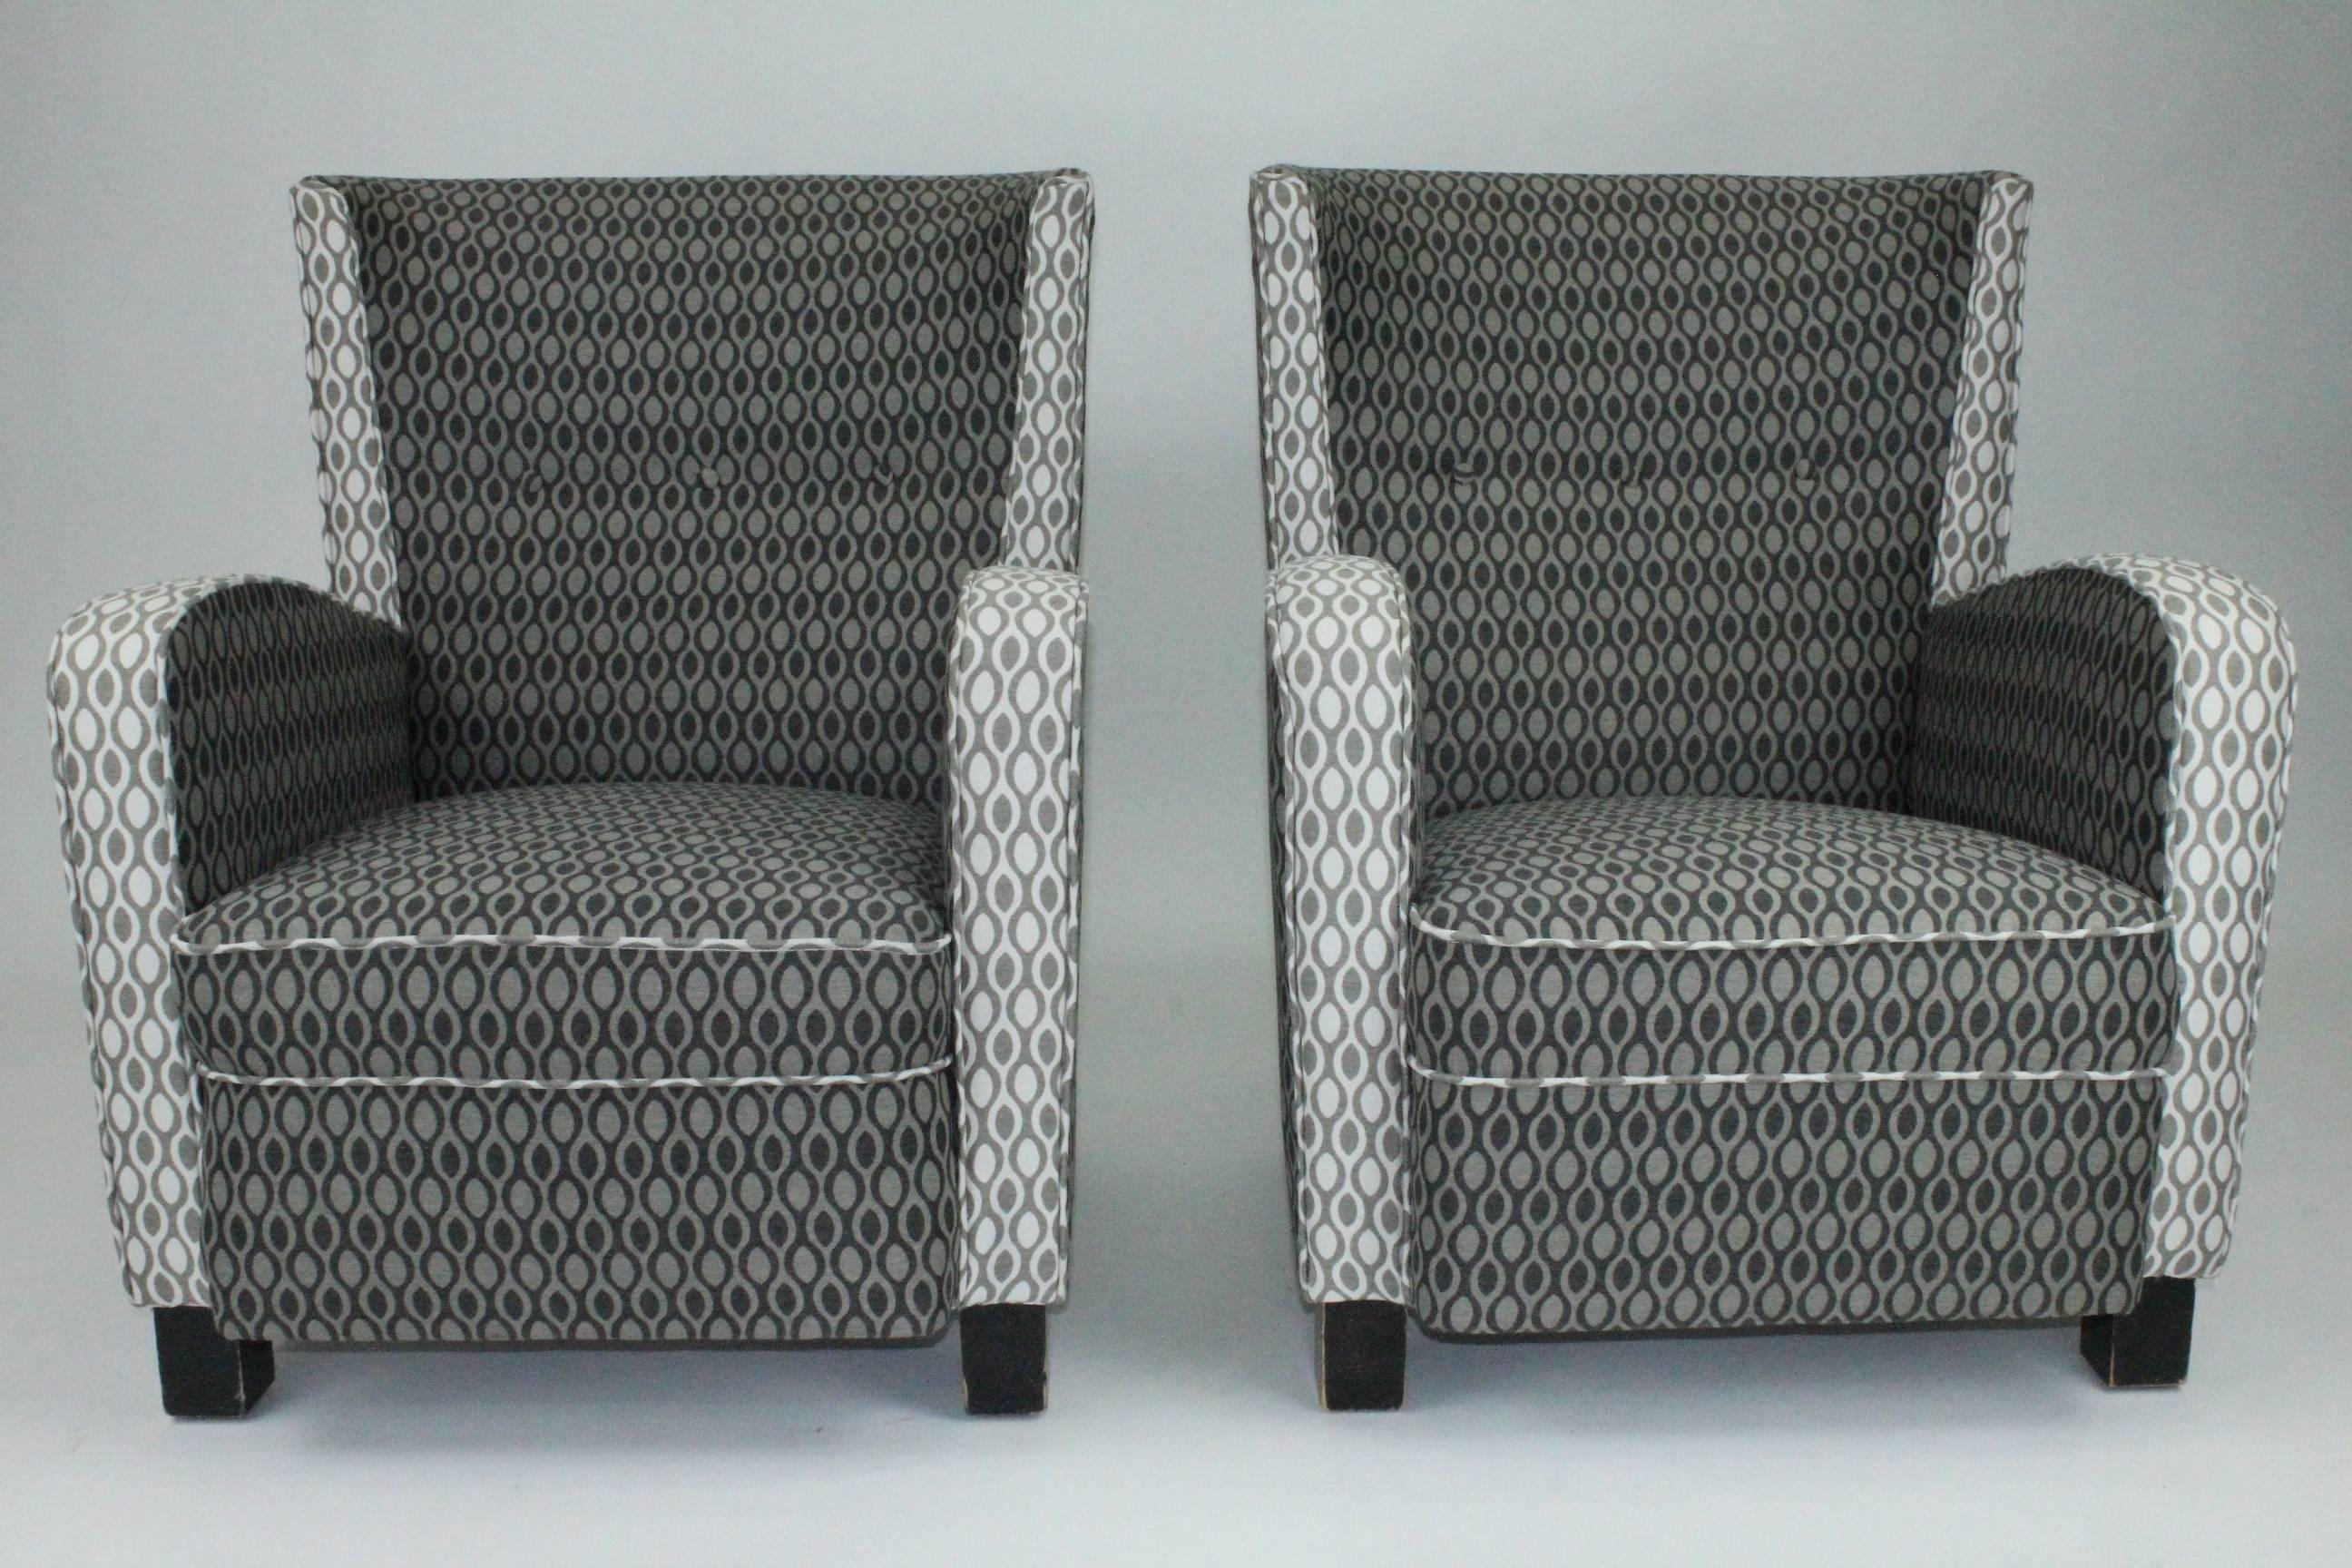 Wonderful pair of newly upholstered lounge chairs. Most likely by Margareta Köhler for Futurum, Stockholm 1930s. Very comfortable and in a very good condition.

In 1934 Marie Louise Idestam-Blomberg and Ebba Margareta Köhler founded Futurum in